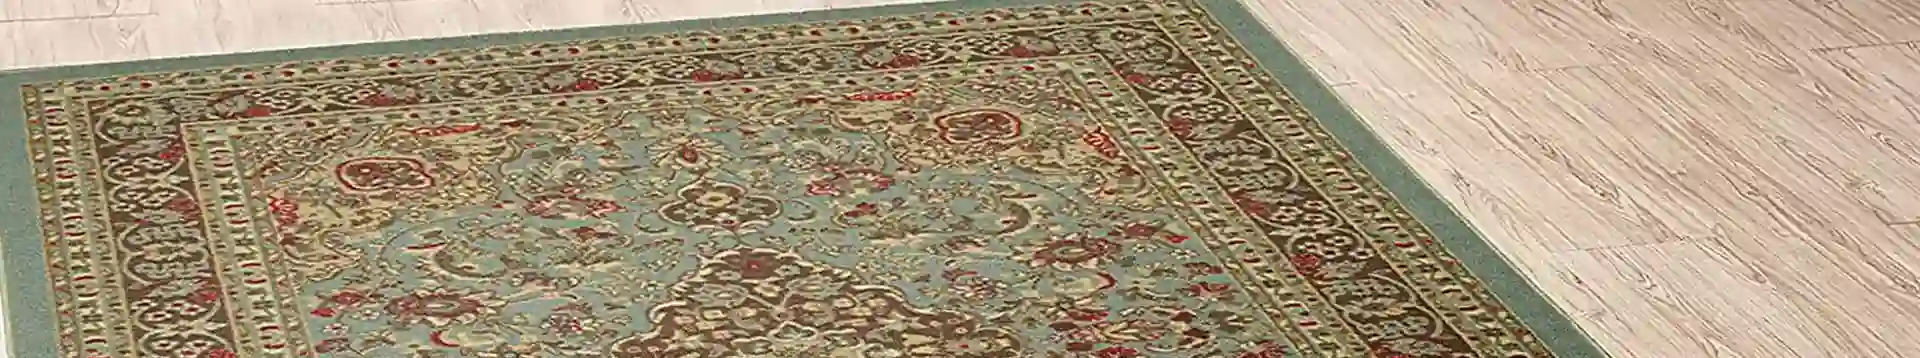 Rug Cleaners Ft Lauderdale Image Gallery